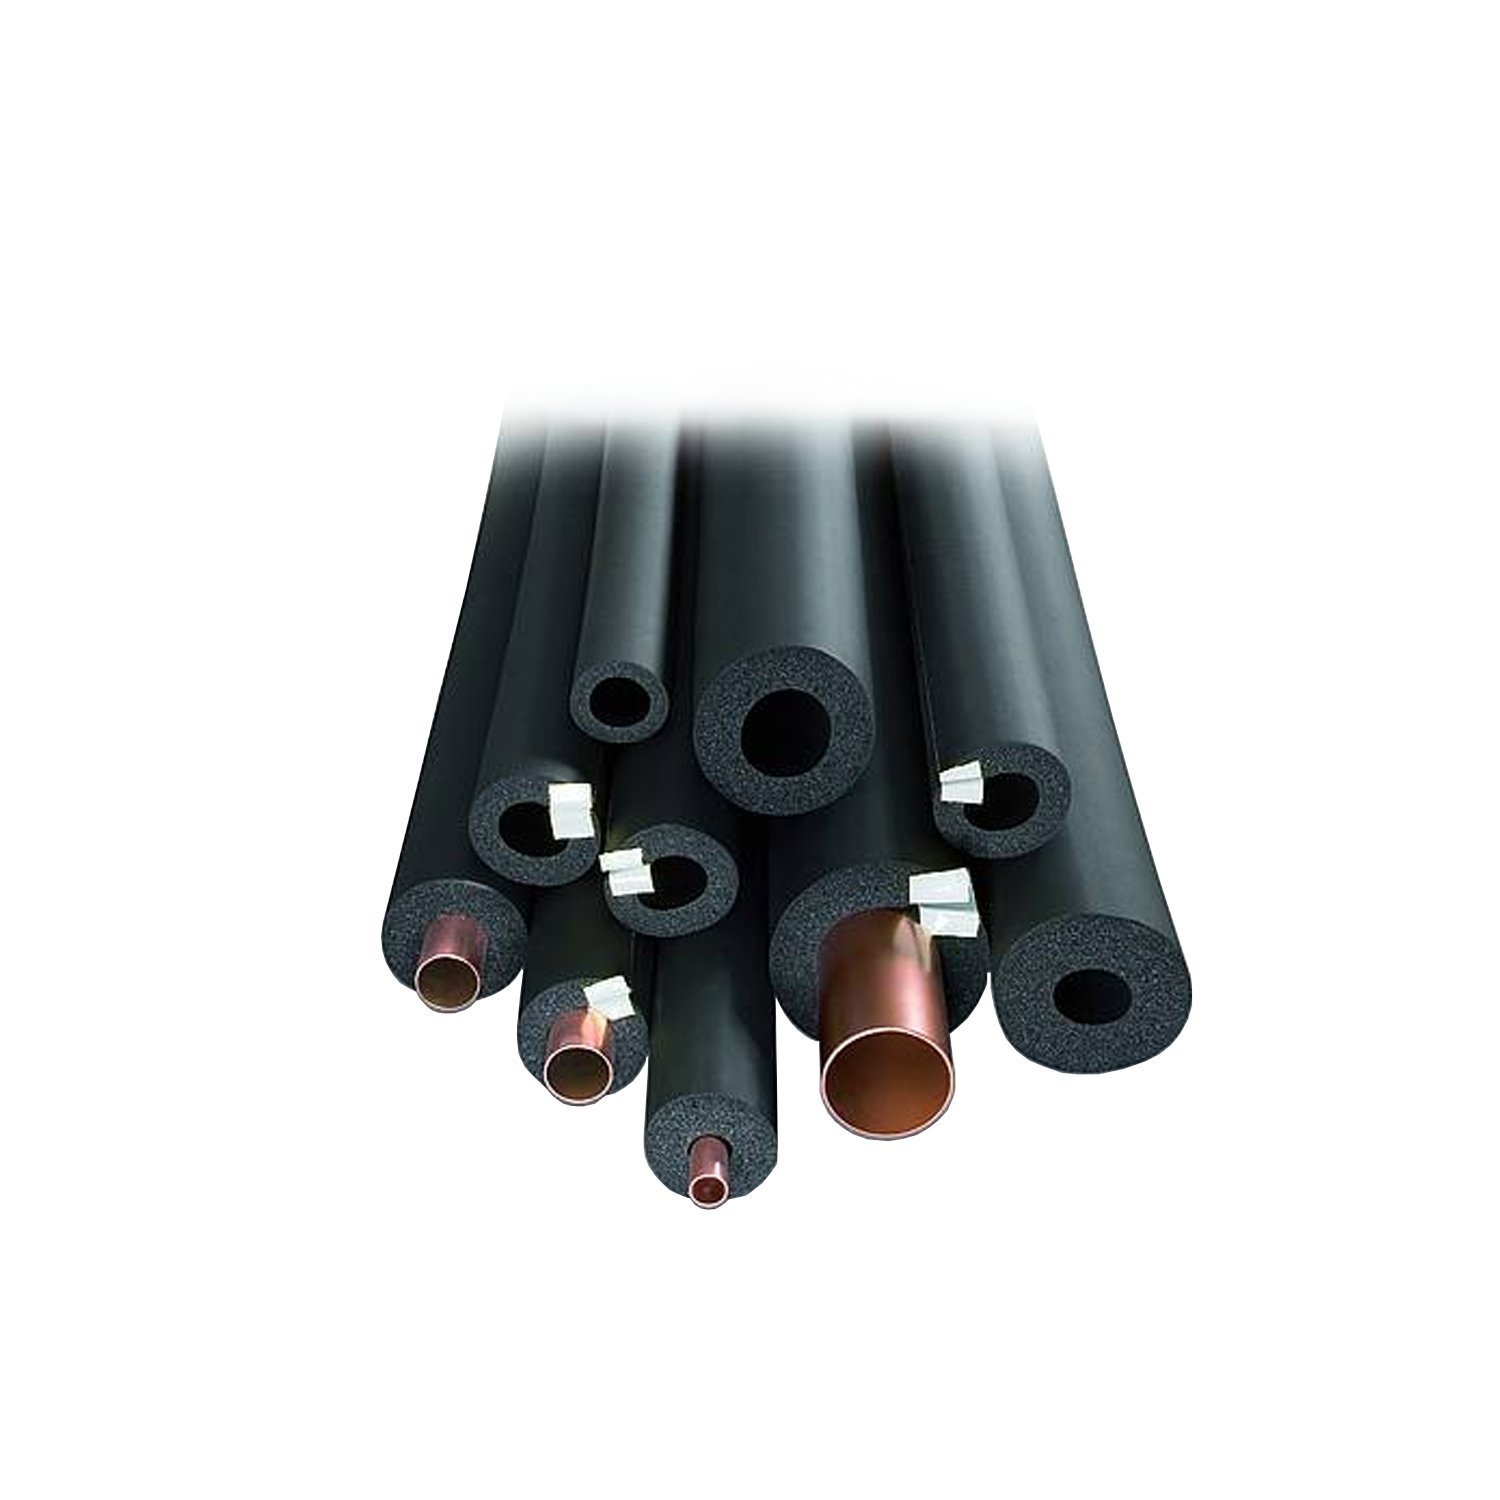 Pipe insulation 6 mm, Armaflex AF, thickness 9.5 mm, length 2 m + buy more  cheap